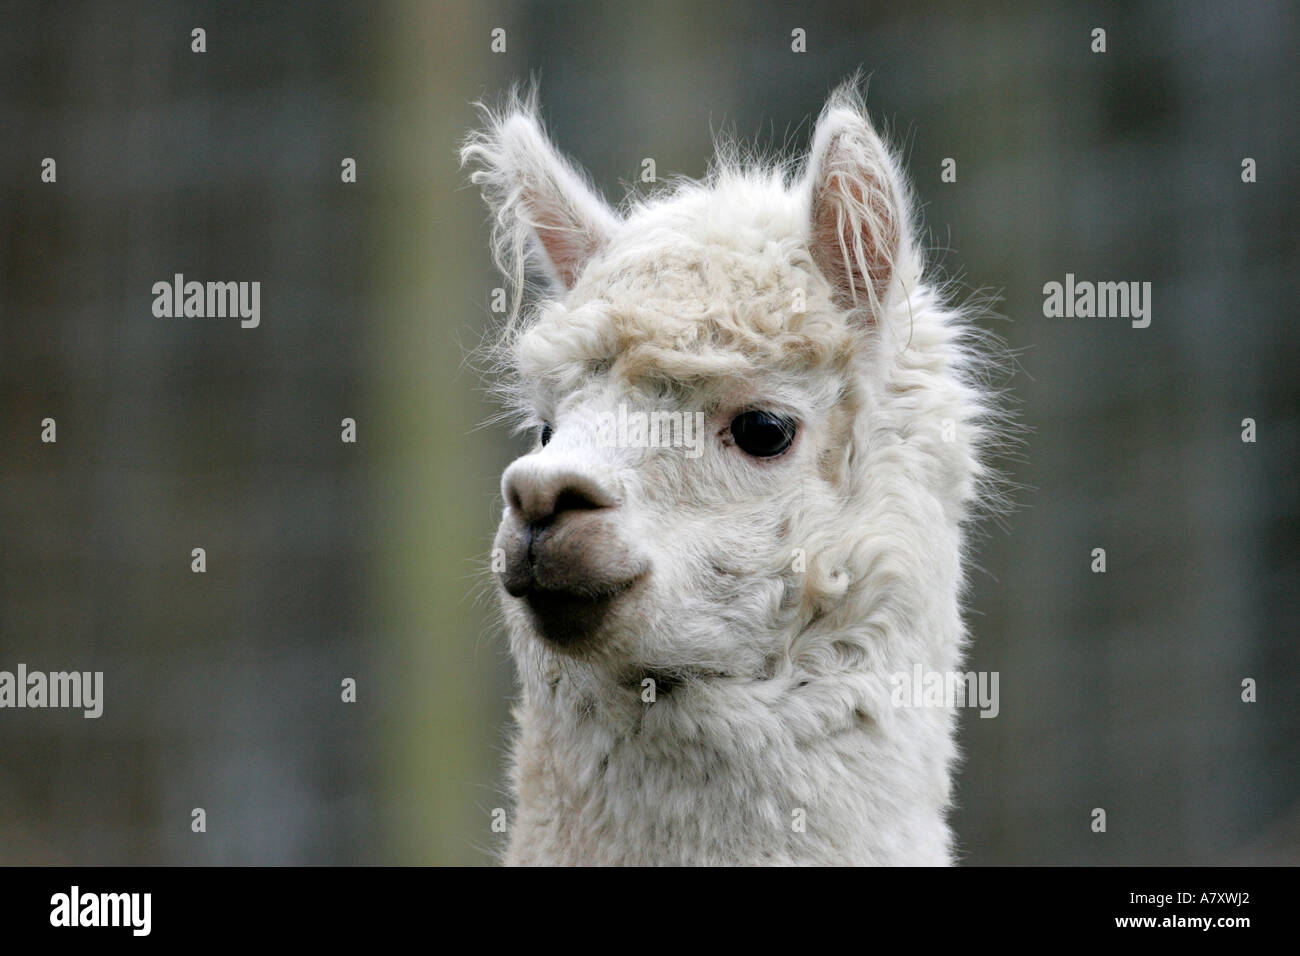 White Alpaca Vicugna pacos head close up on a small farm holding outside portadown county armagh northern ireland Stock Photo